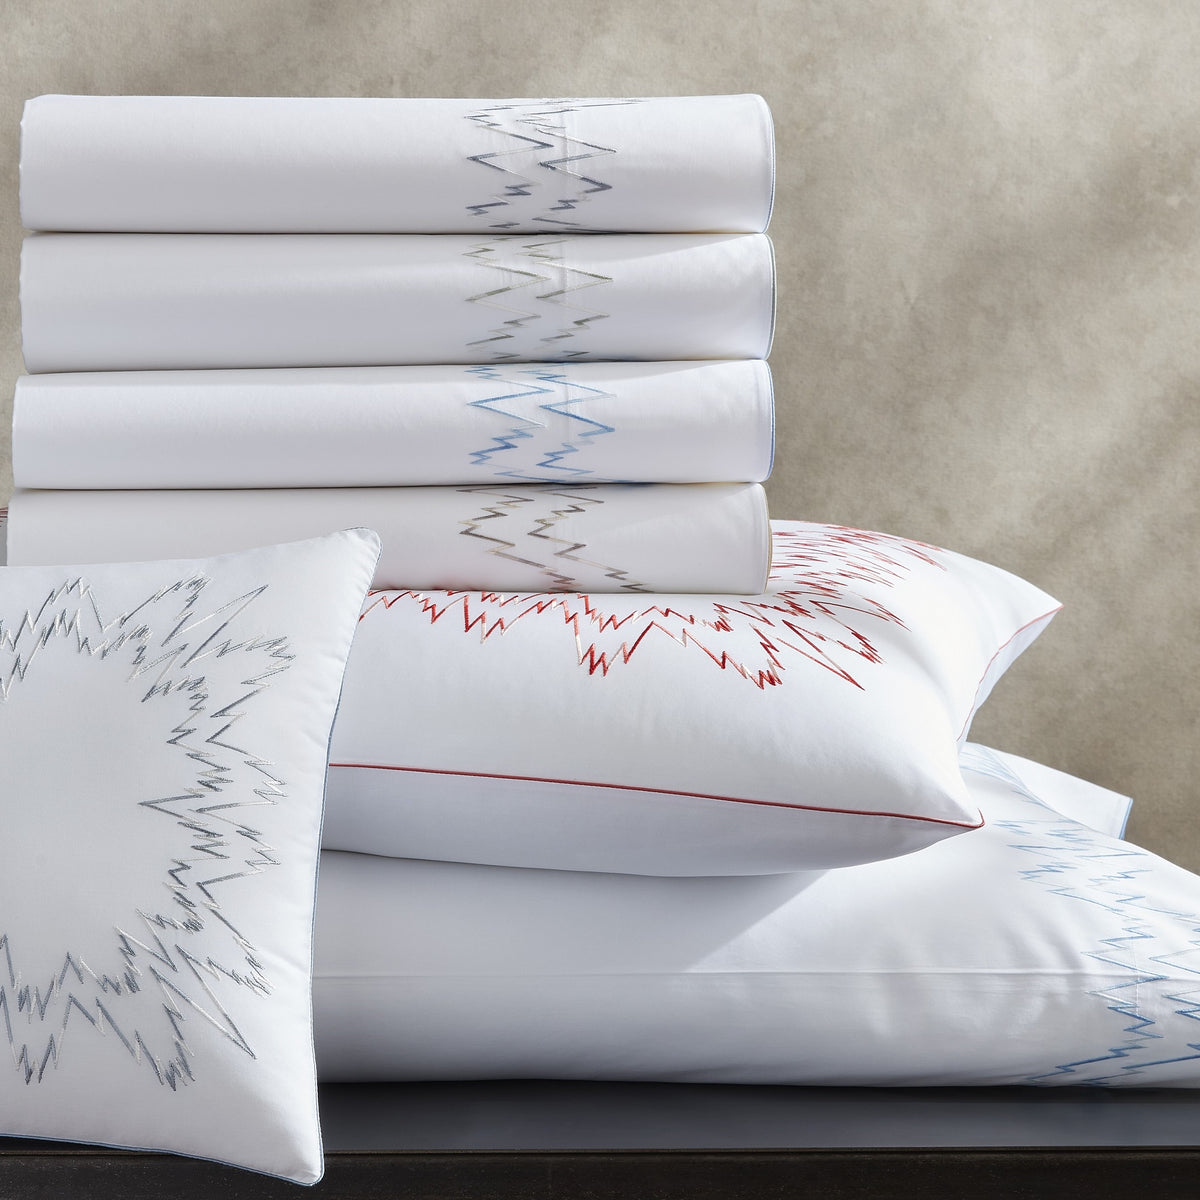 Stack of Matouk Aries Bedding in Different Colors